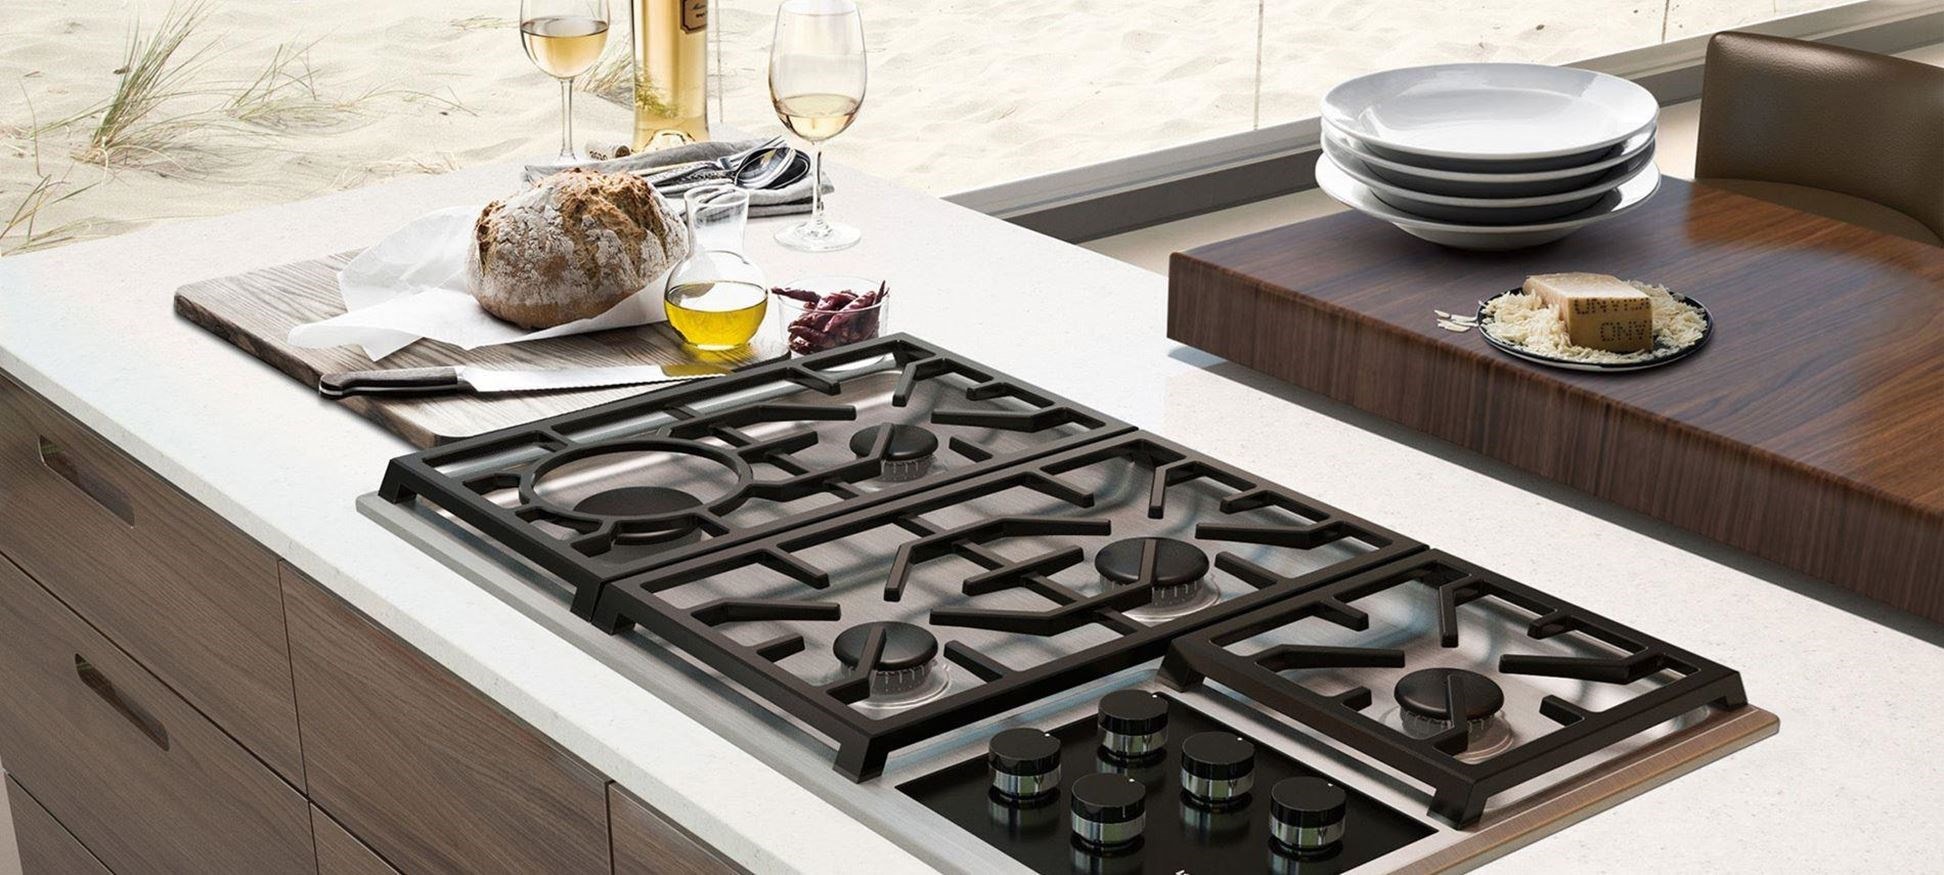 91 CM TRANSITIONAL GAS COOKTOP - 5 BURNERS